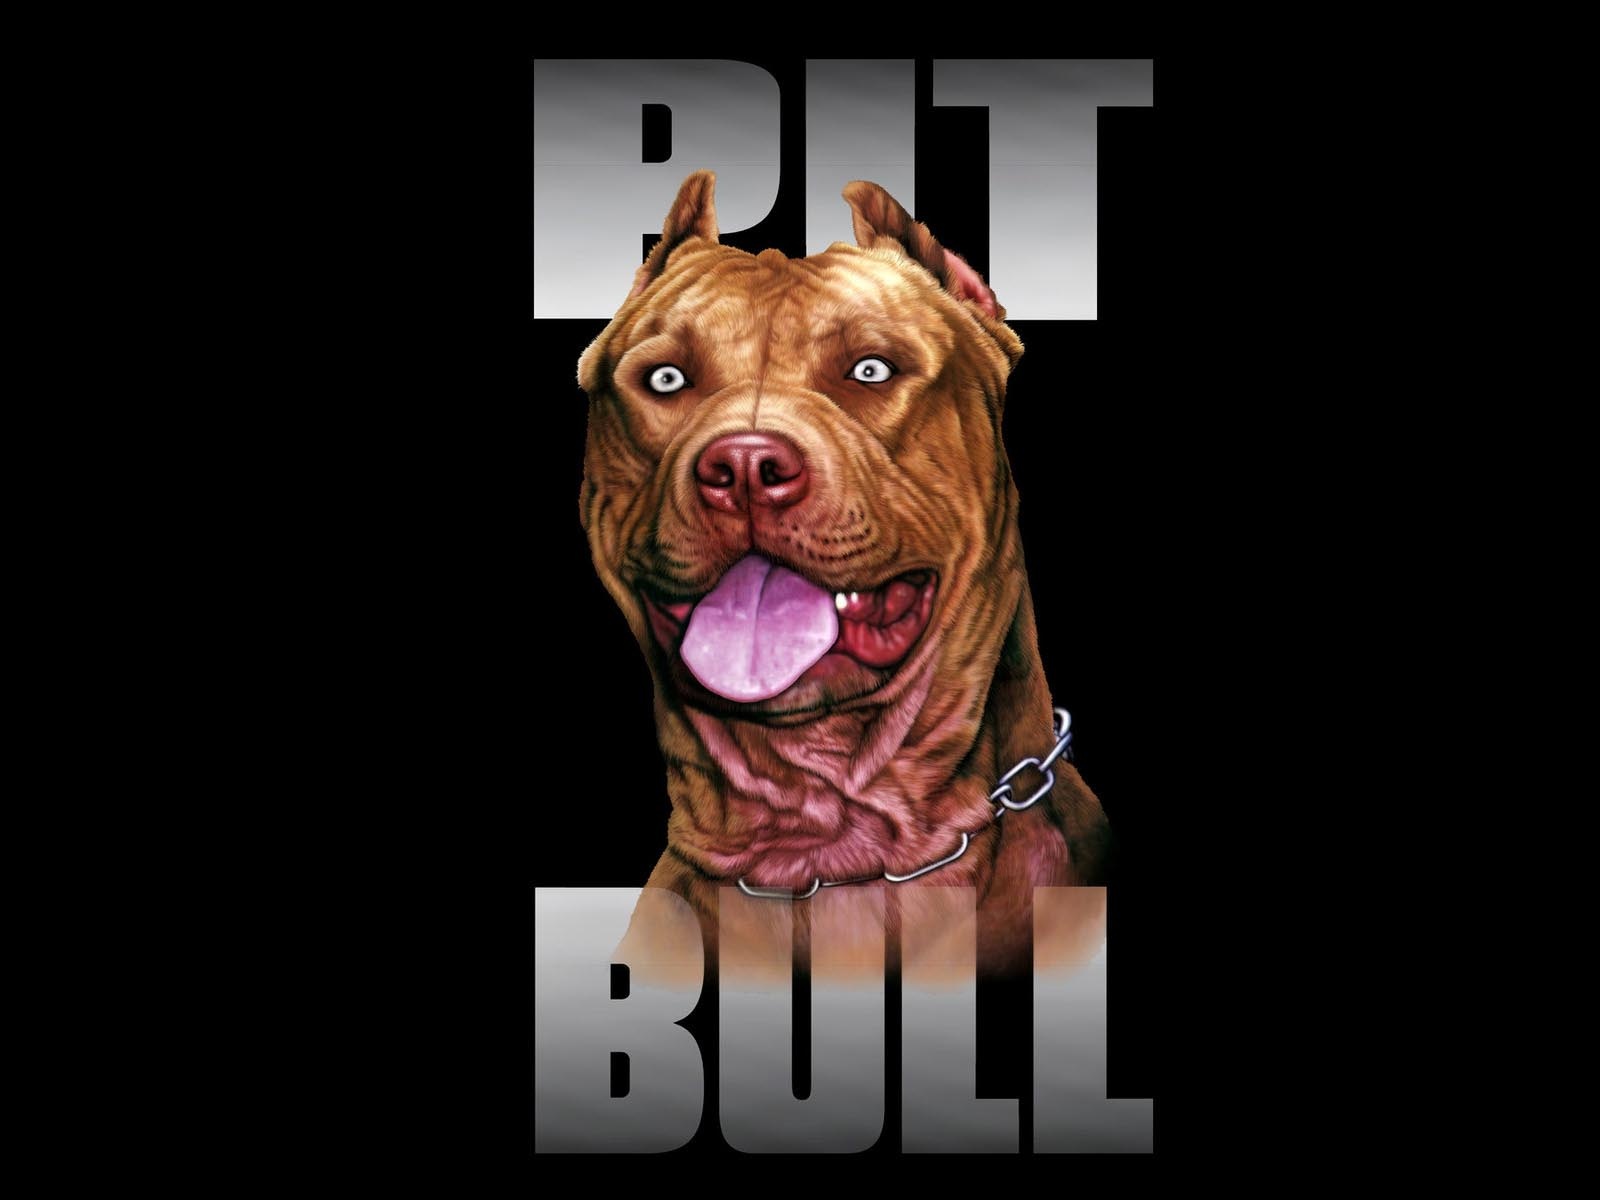 Pitbull Dog Wallpaper Pictures In High Definition Or